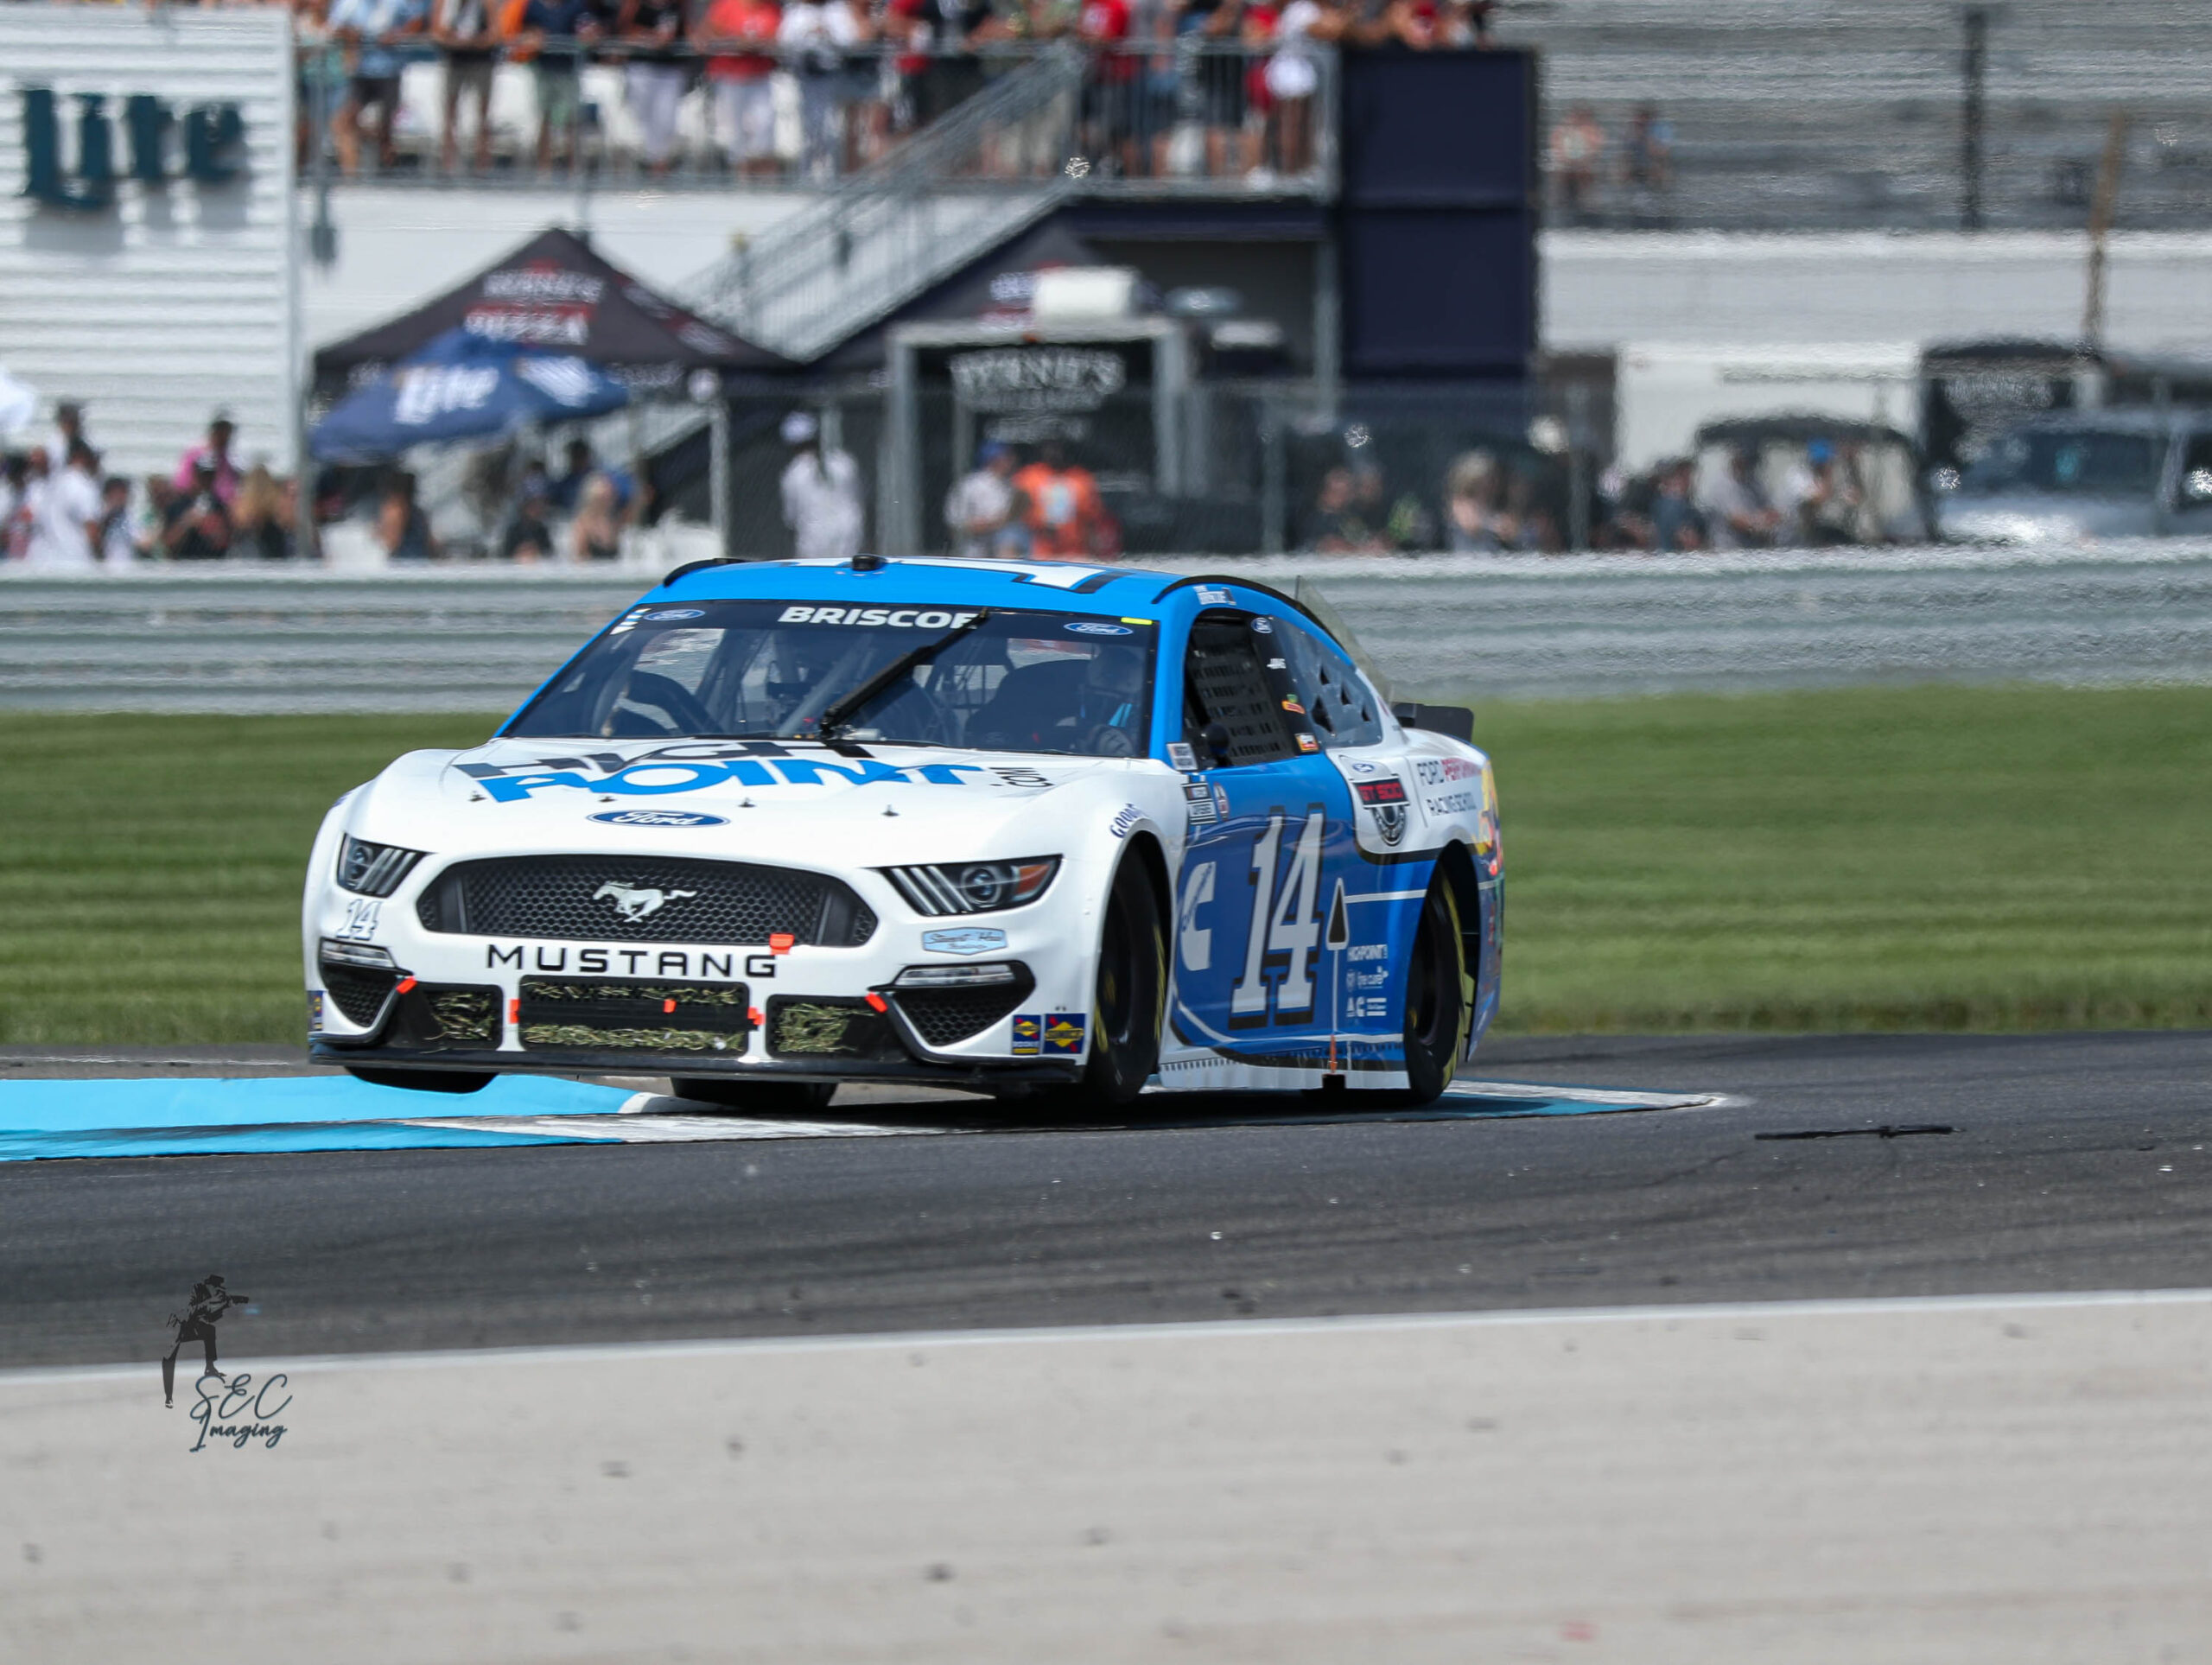 Chiefly, Chase Briscoe found himself in contention last Sunday at Indianapolis. (Photo: Stephen Conley | The Podium Finish)